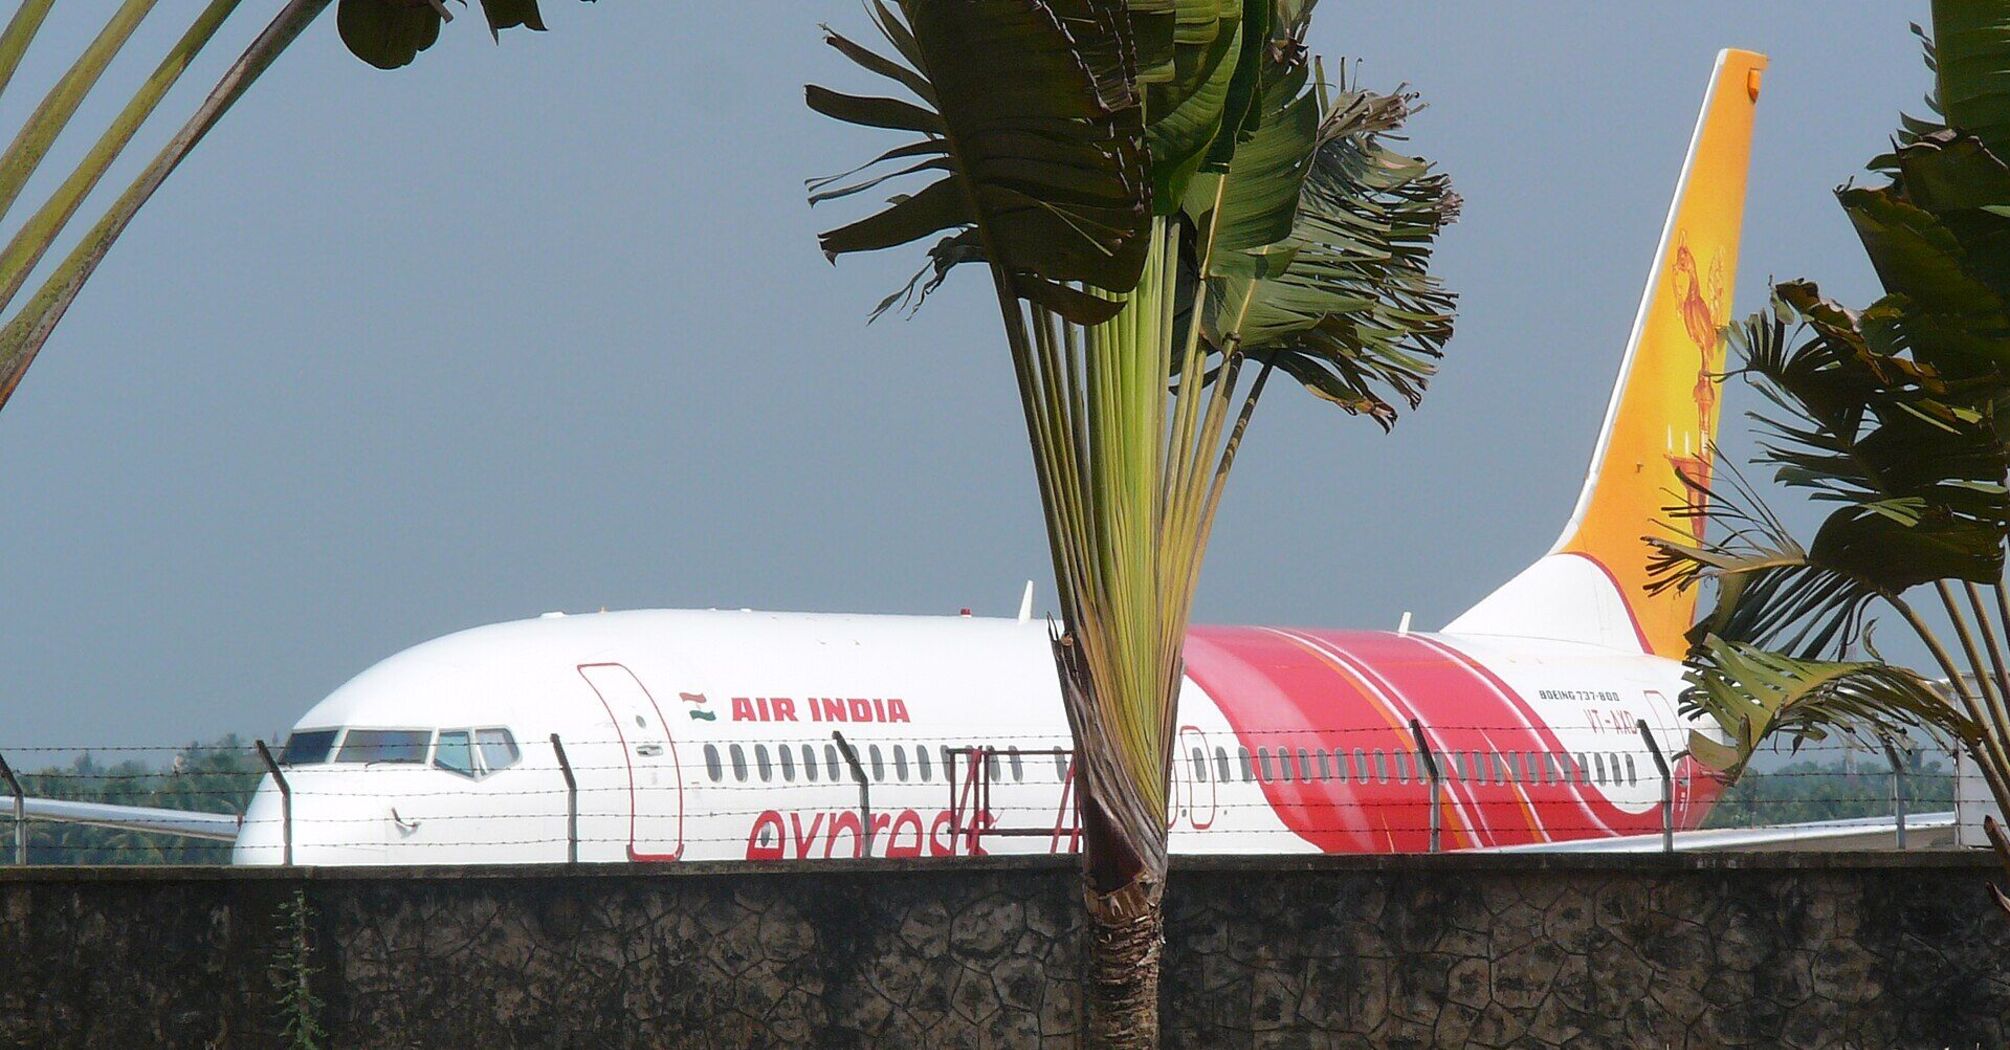 Air India Express has introduced new fares for passengers to help save on tickets